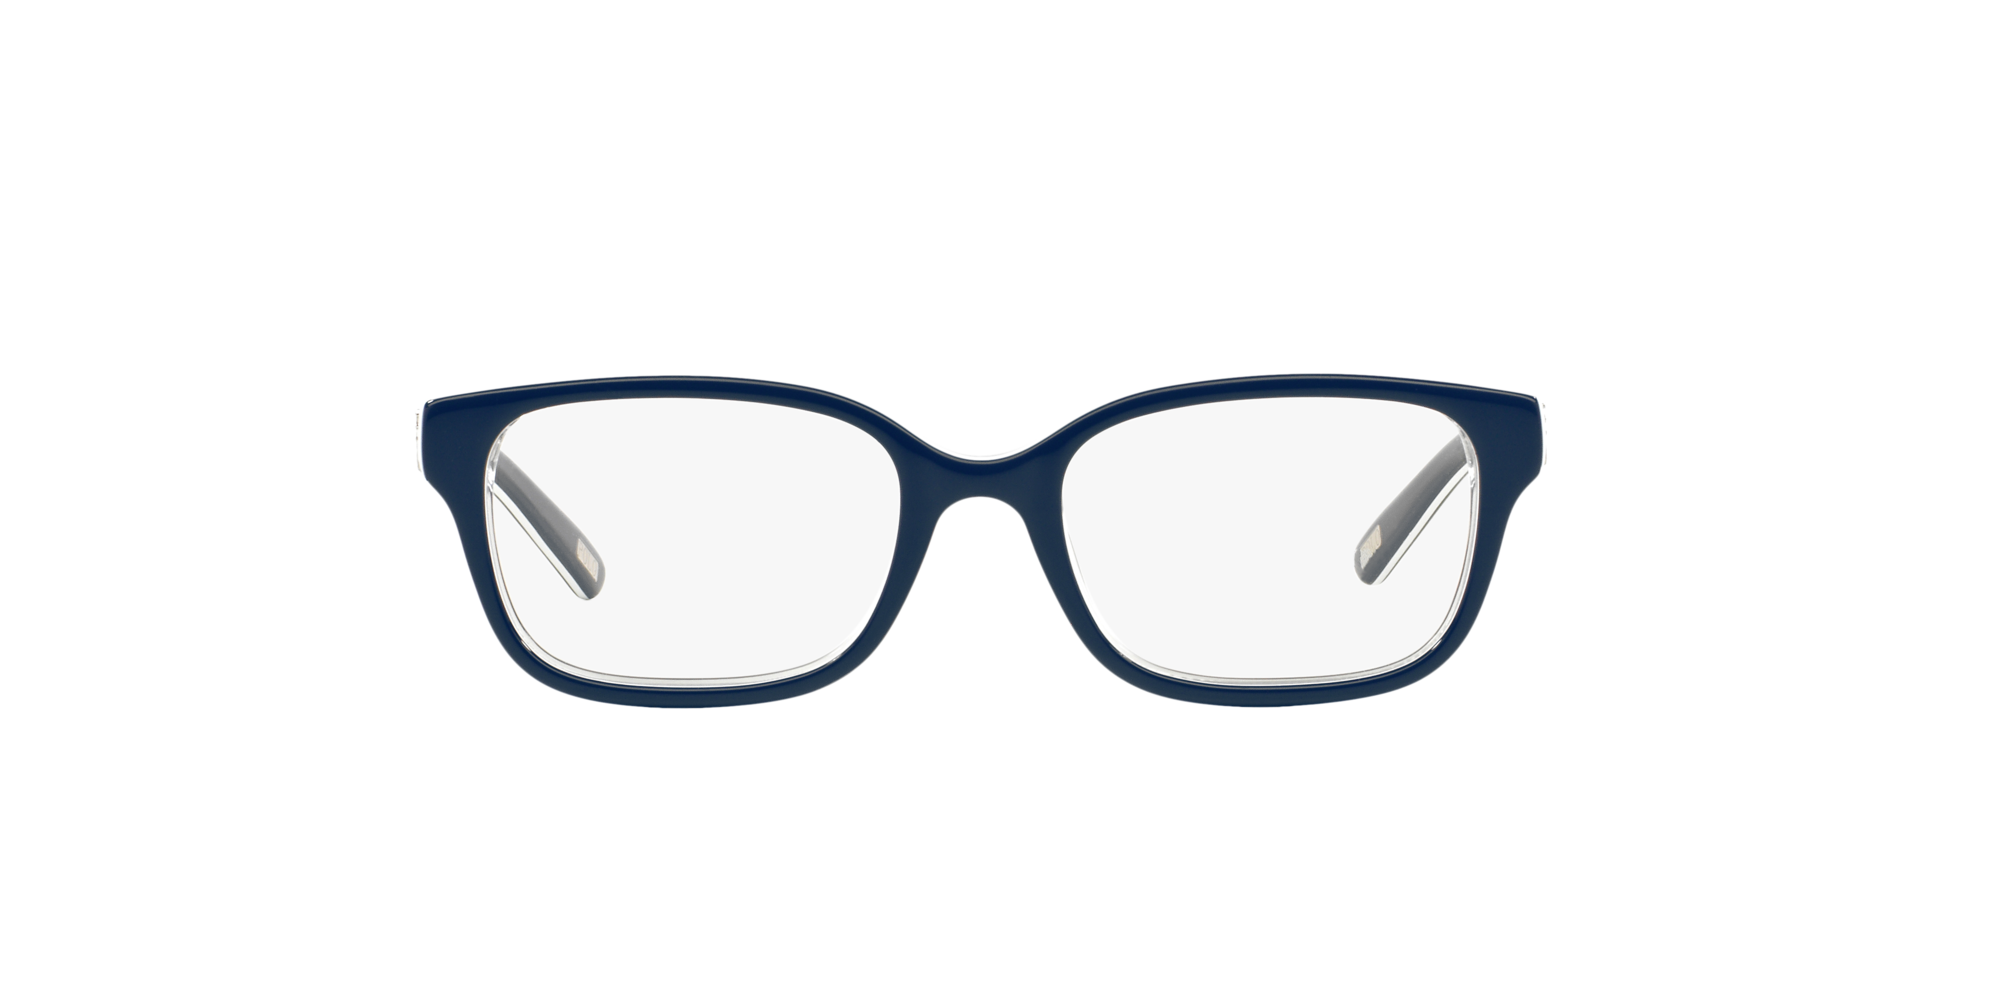 polo glasses lenscrafters